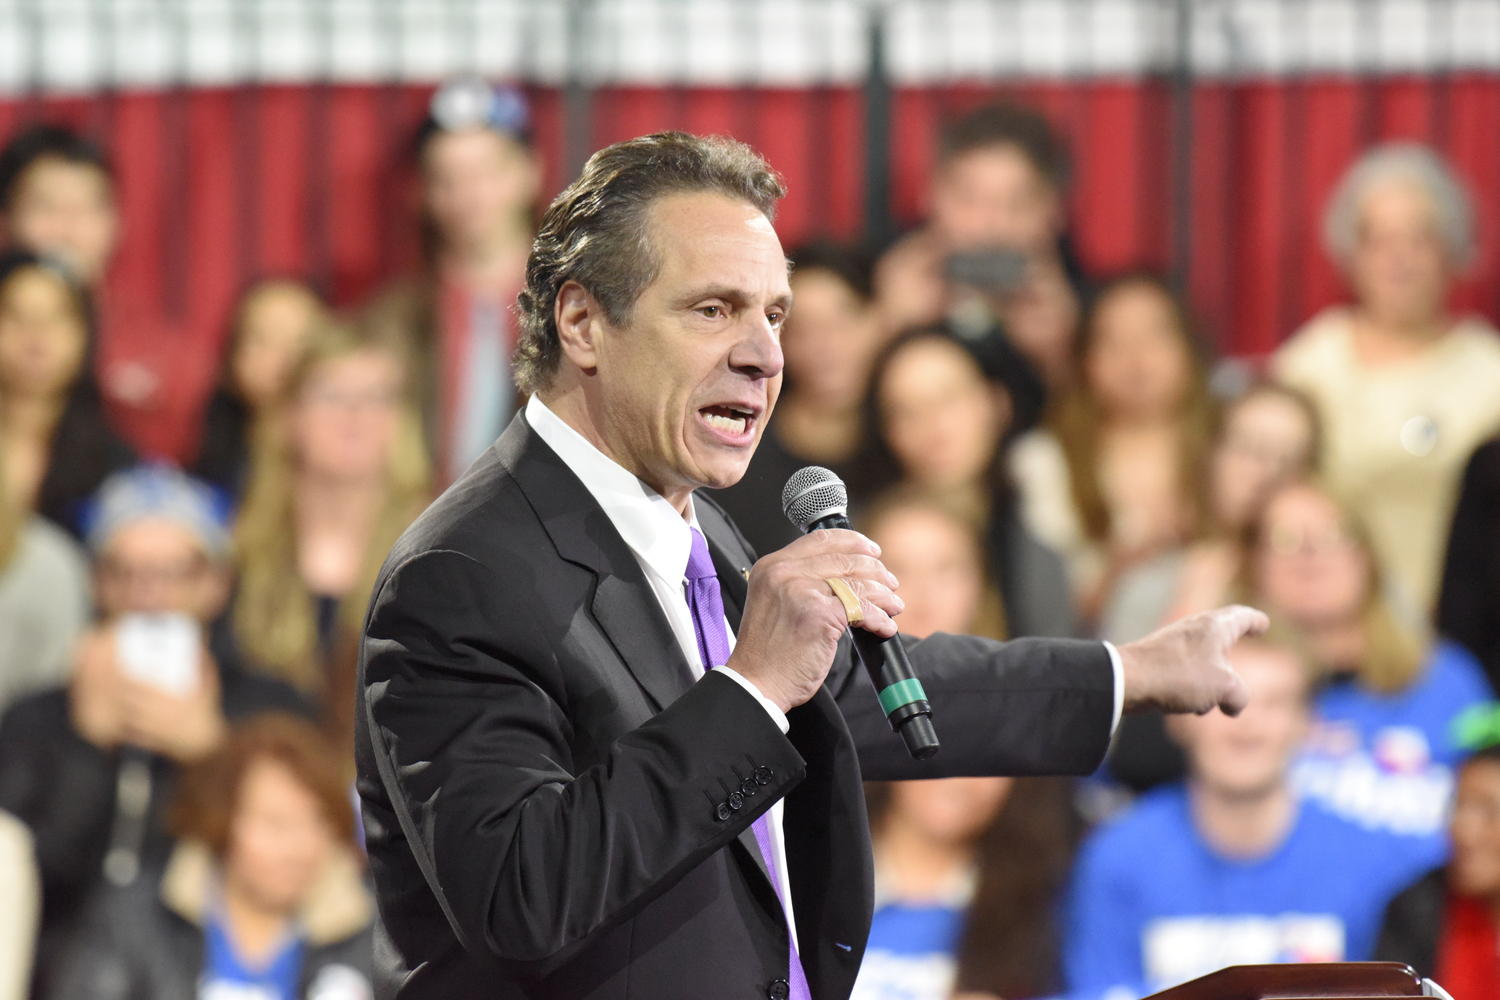 New-york-governor-proposes-giving-financial-watchdog-more-teeth